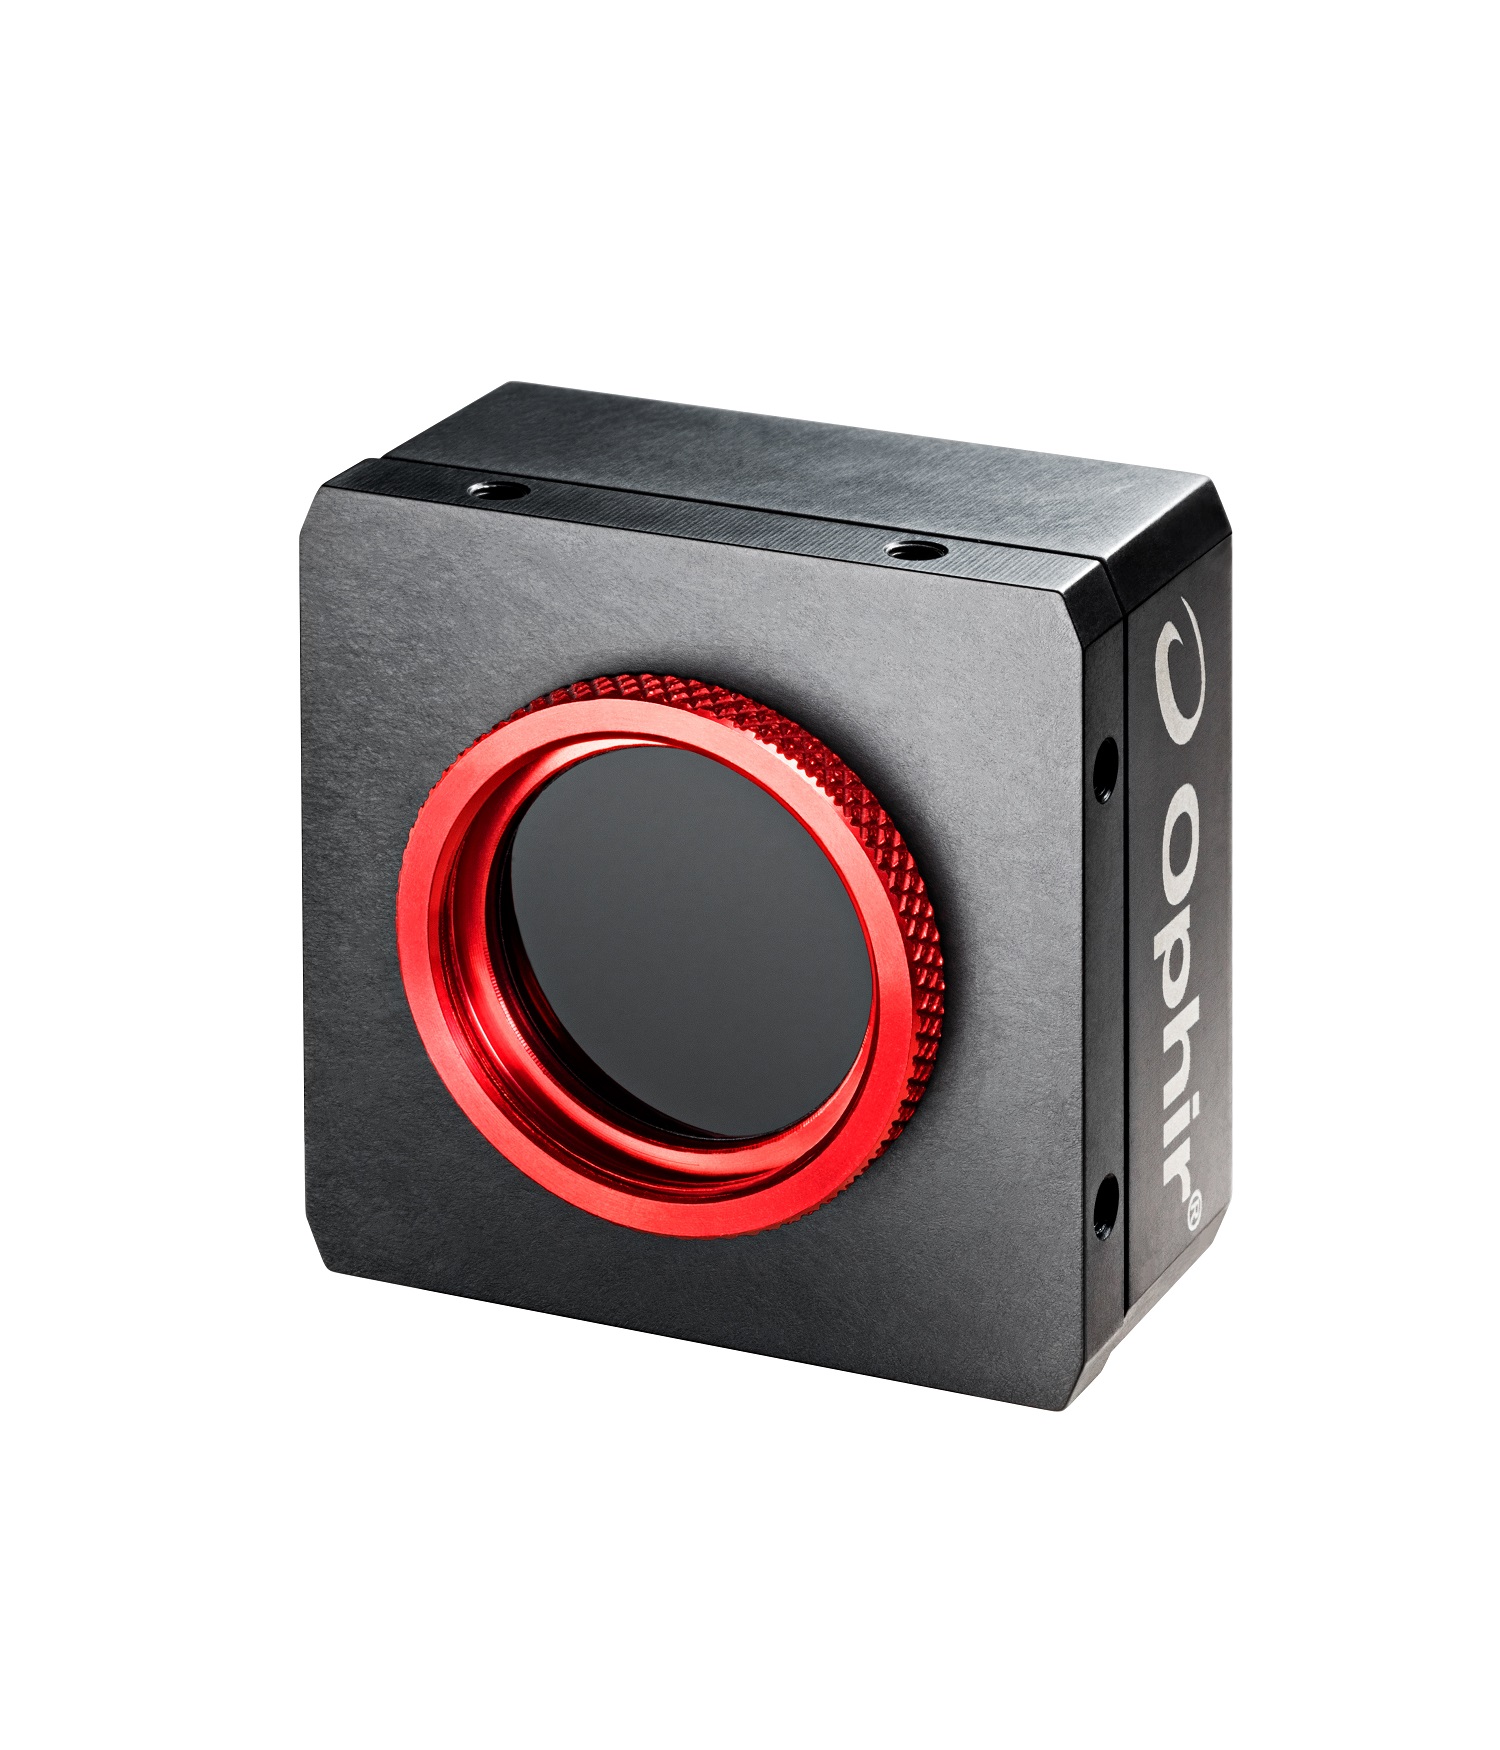 New Ophir® CMOS Camera-Based Beam Profiler for 190-1100nm Wavelengths Features Improved Accuracy at NIR, Nd:YAG Wavelengths